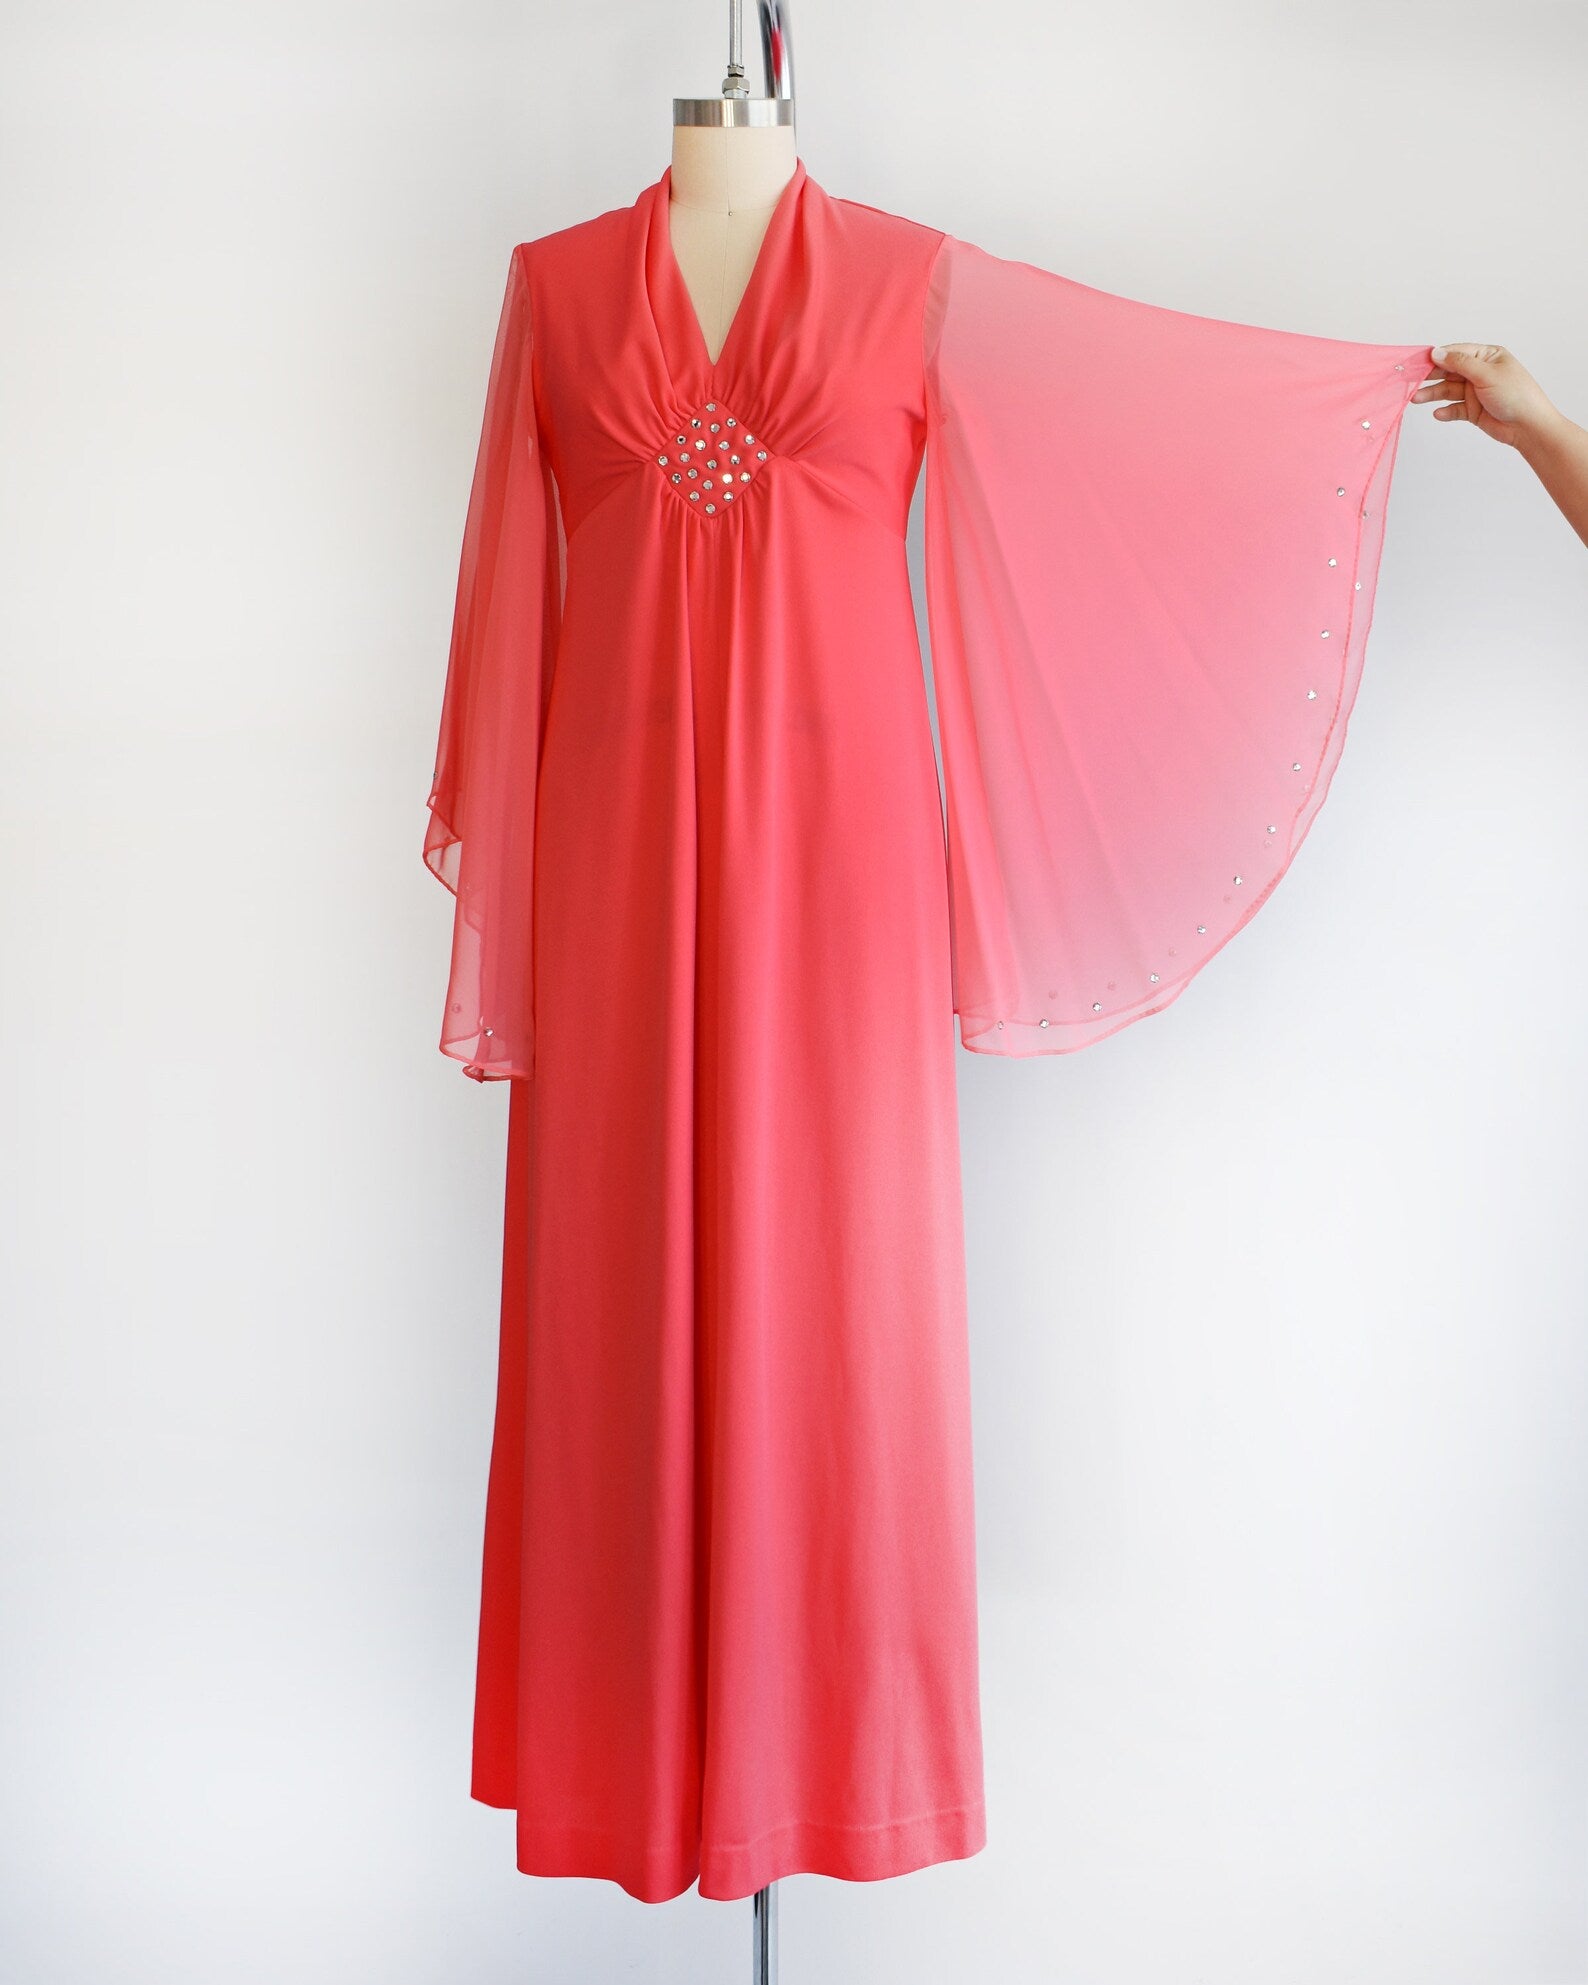 A vintage 70s coral pink maxi dress that has a v-neckline, rhinestones on the waist, and semi-sheer long angel sleeves with matching rhinestone trim. The dress is modeled on a dress form and is shown with the wide sweep on the sleeves